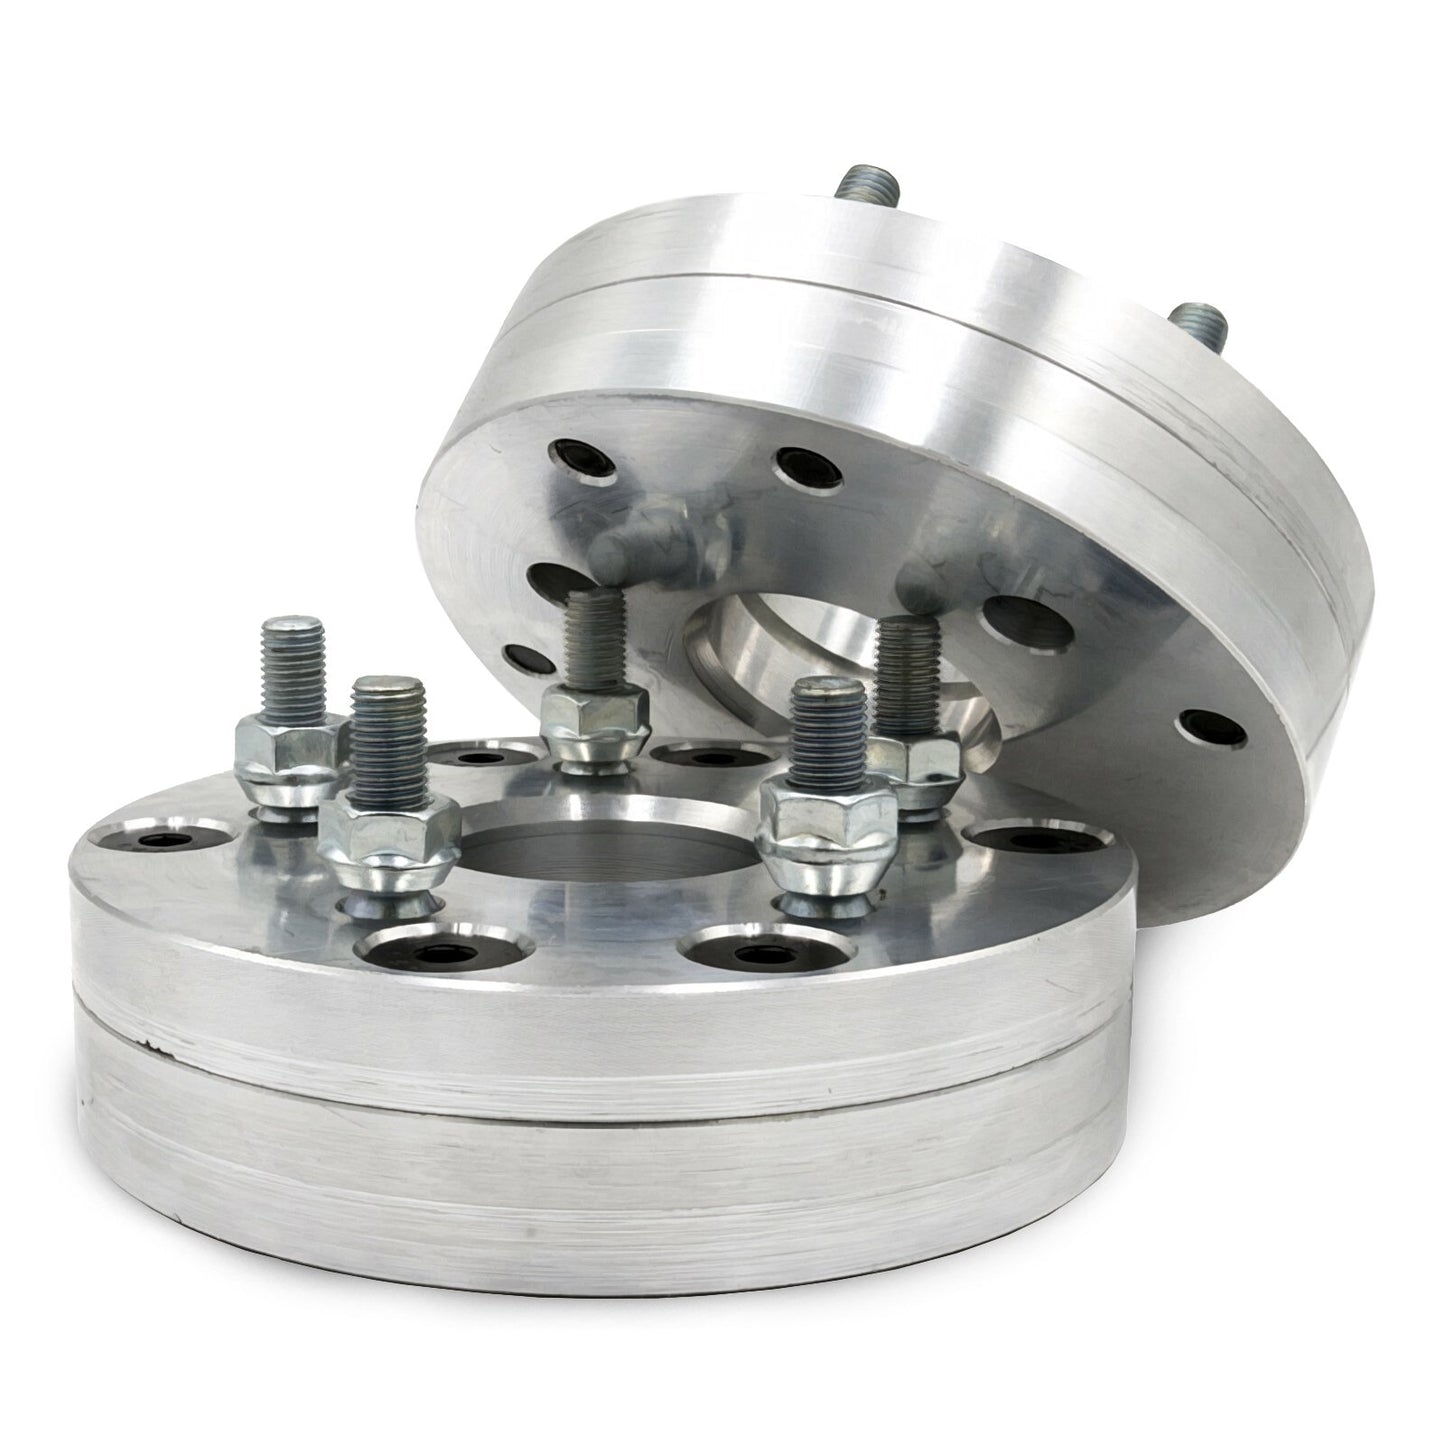 4x110 to 5x4.25" 2 piece Wheel Adapter - Thickness: 1.5" - 3"